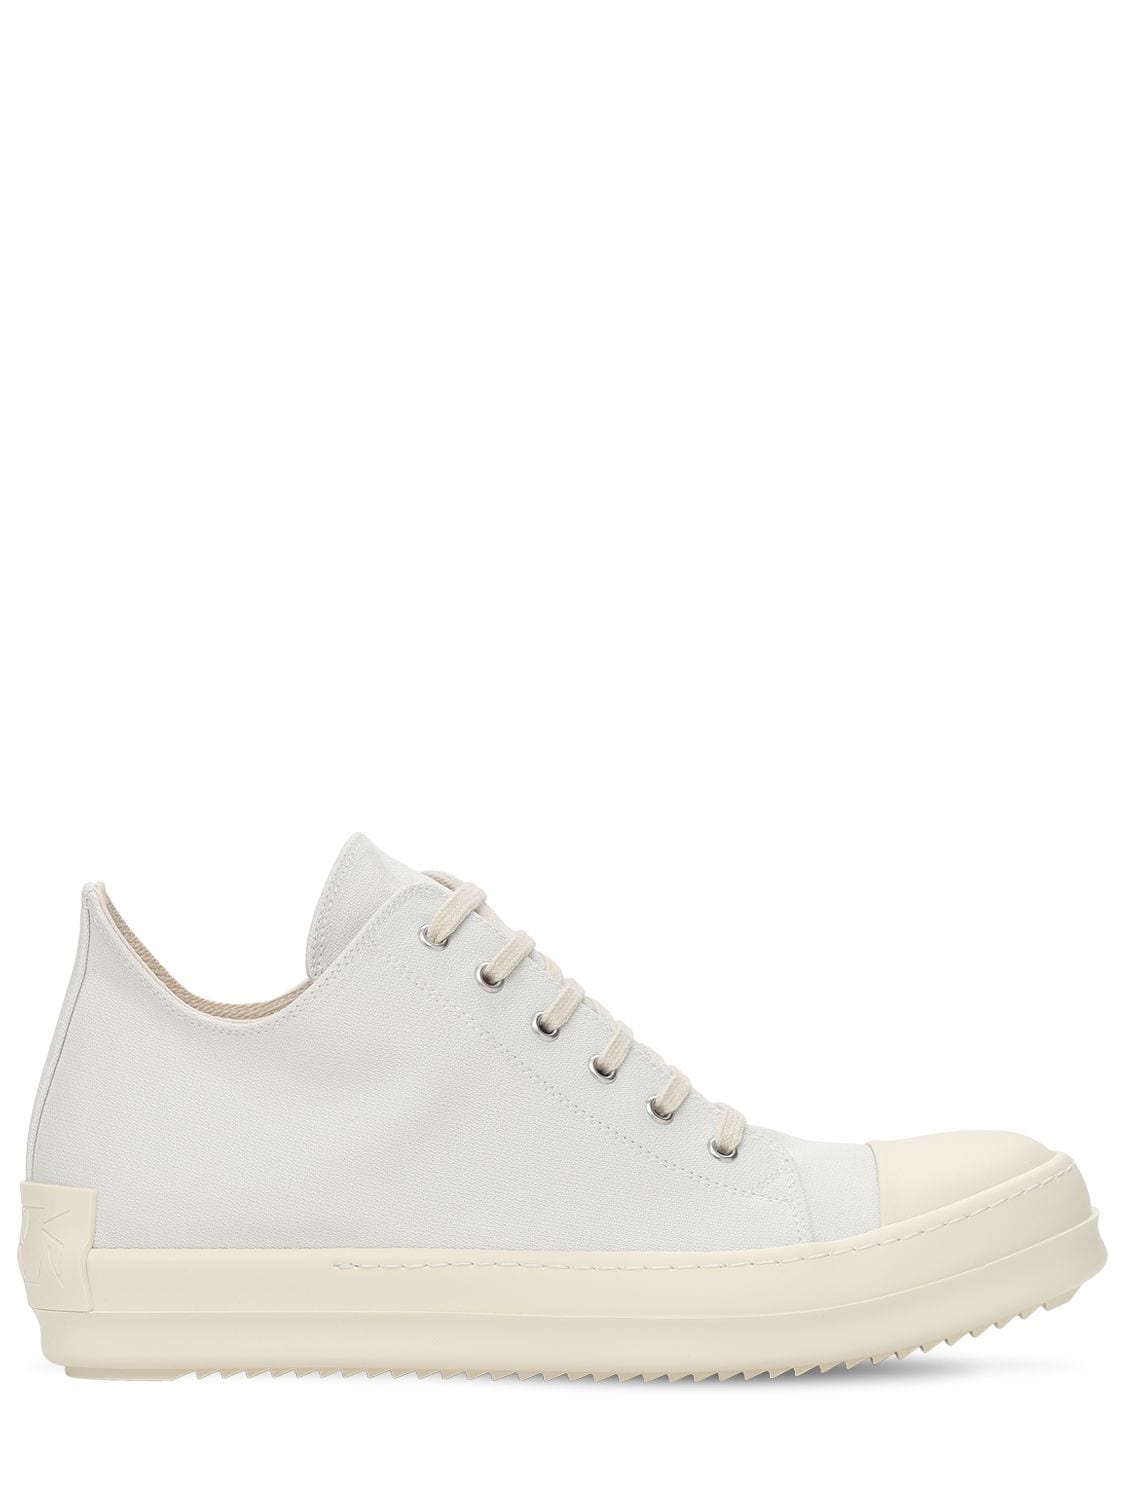 Rick Owens Cotton Canvas Low Lace-up Sneakers In Dirty White,mlk